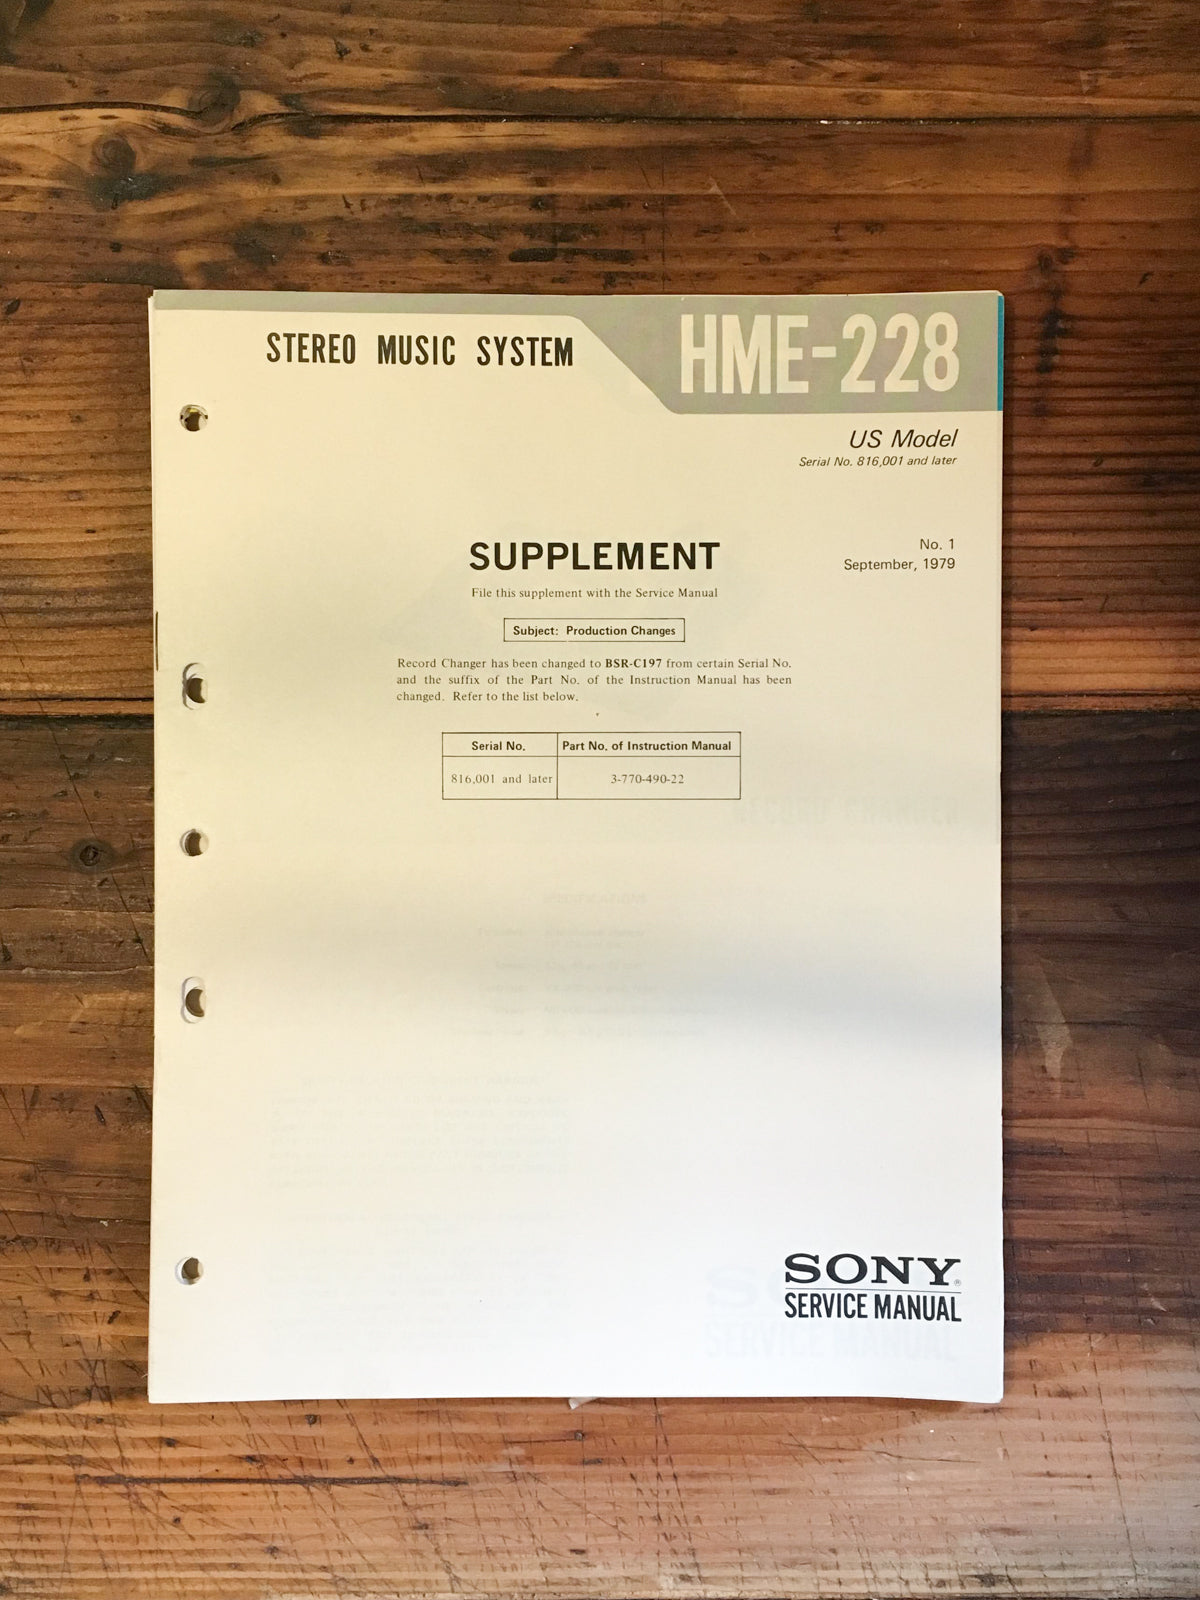 Sony HME-228 Stereo Service Manual Supplement *Original*